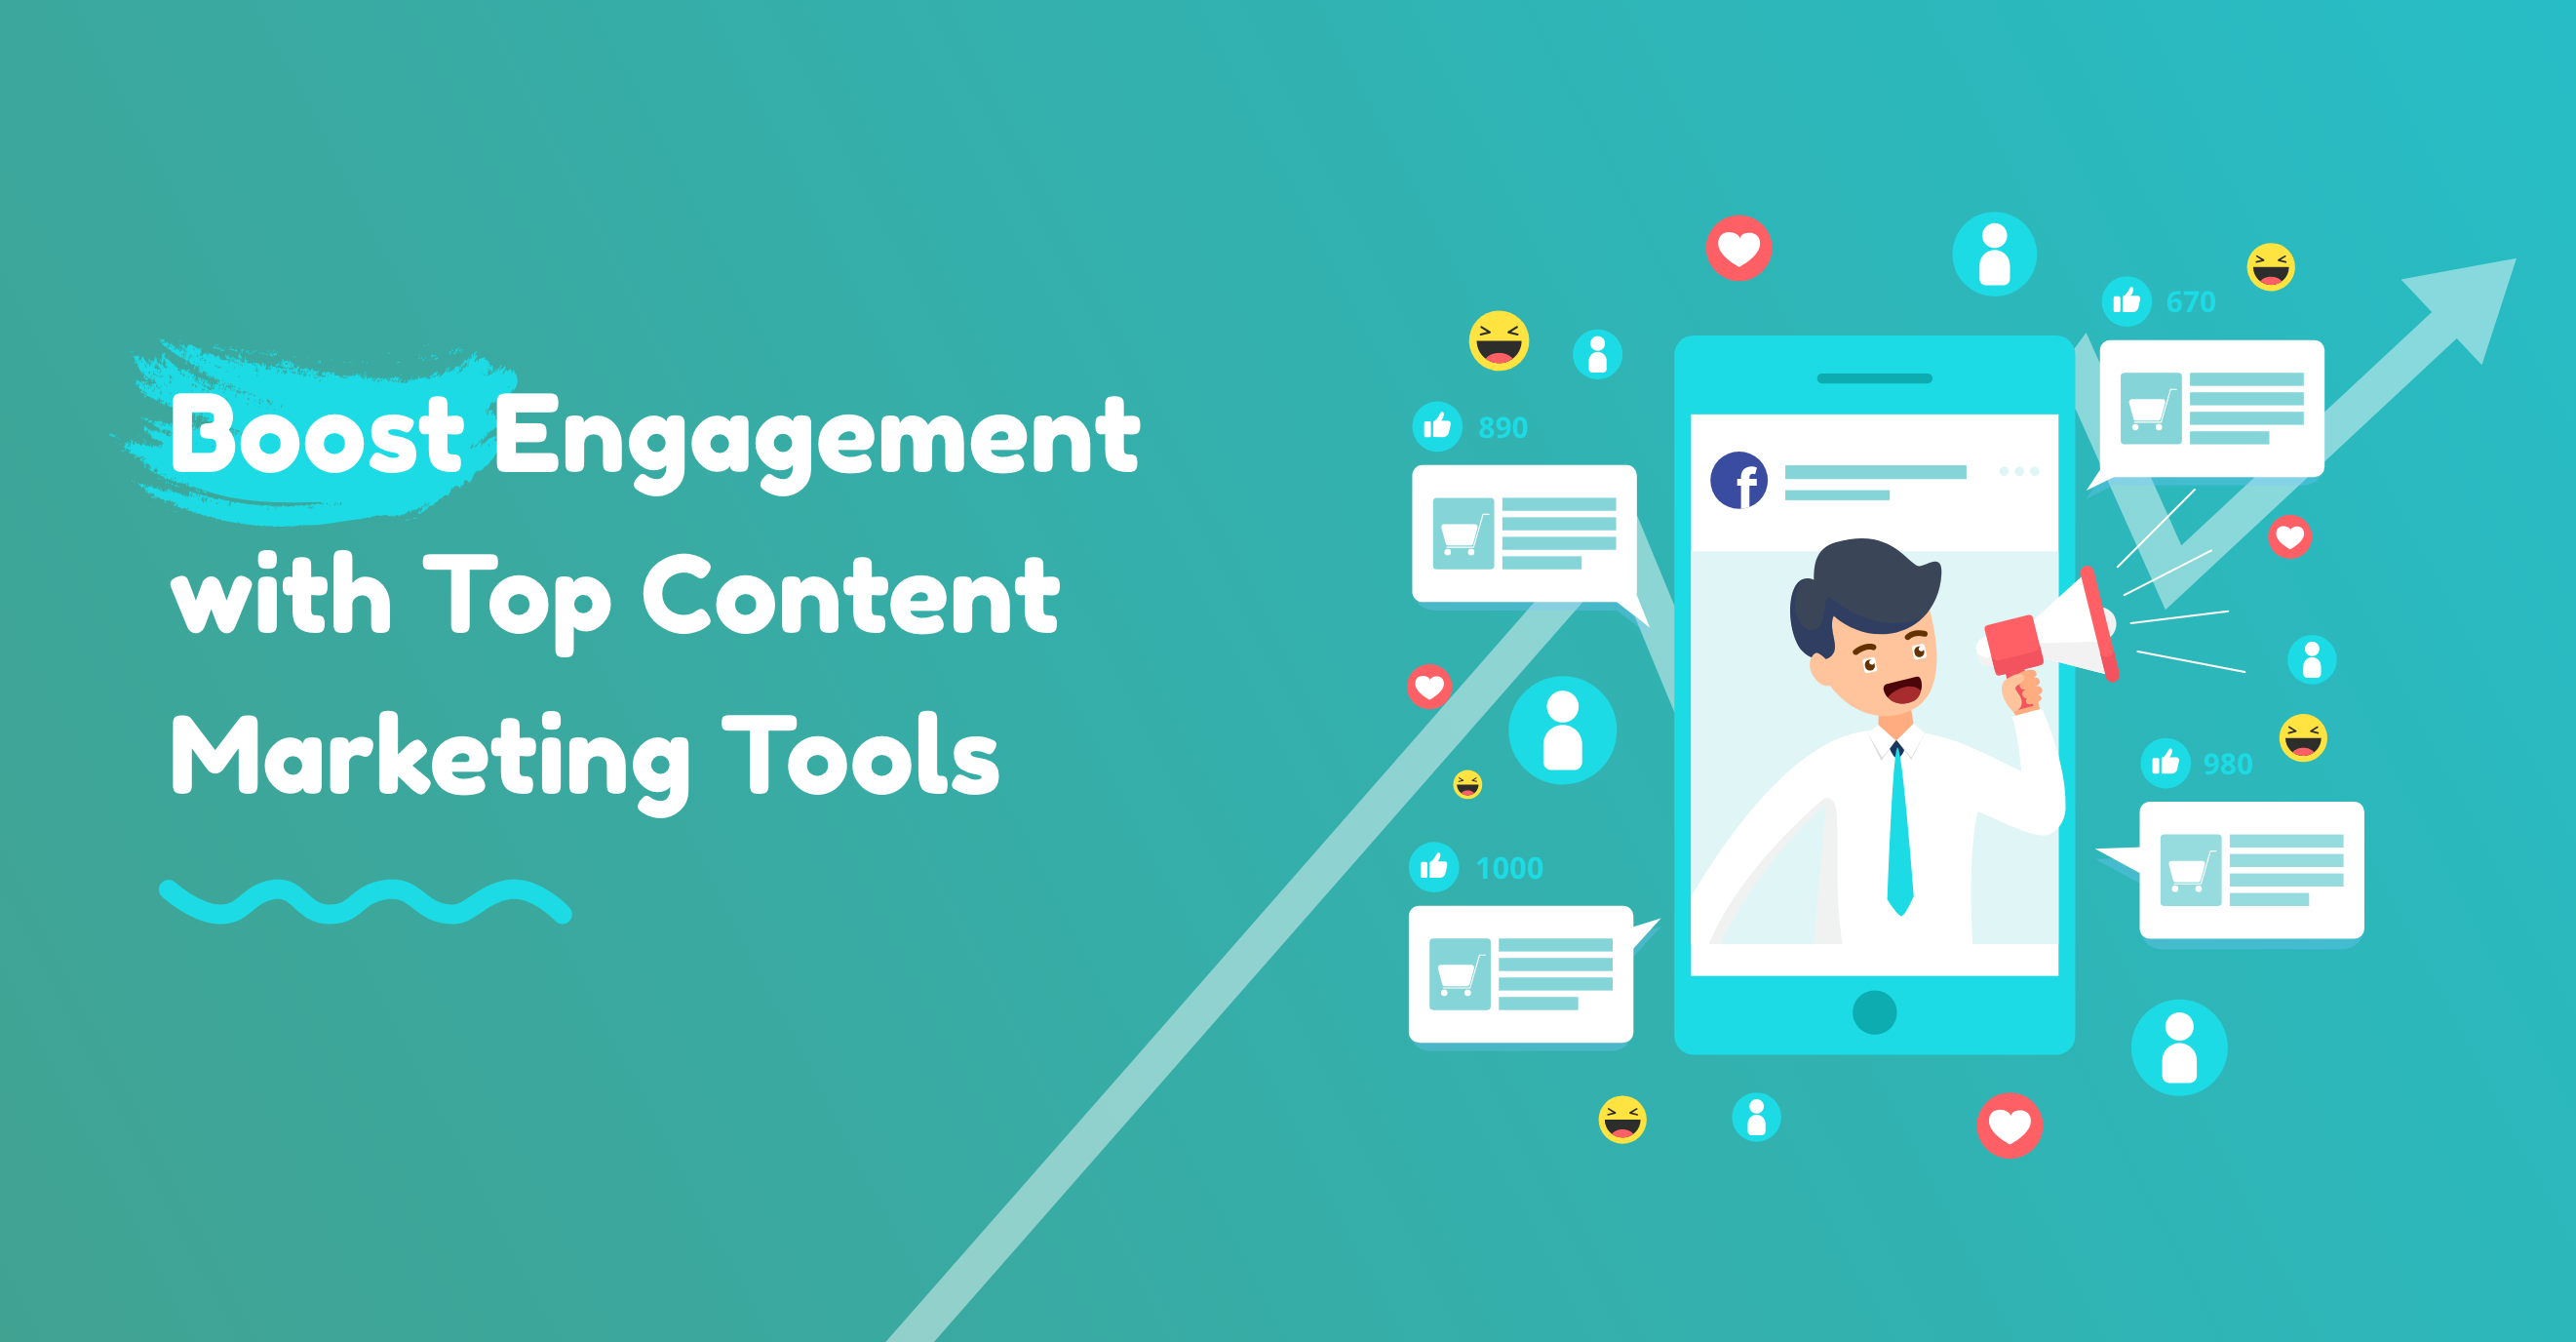 Boost Engagement with Top Content Marketing Tools